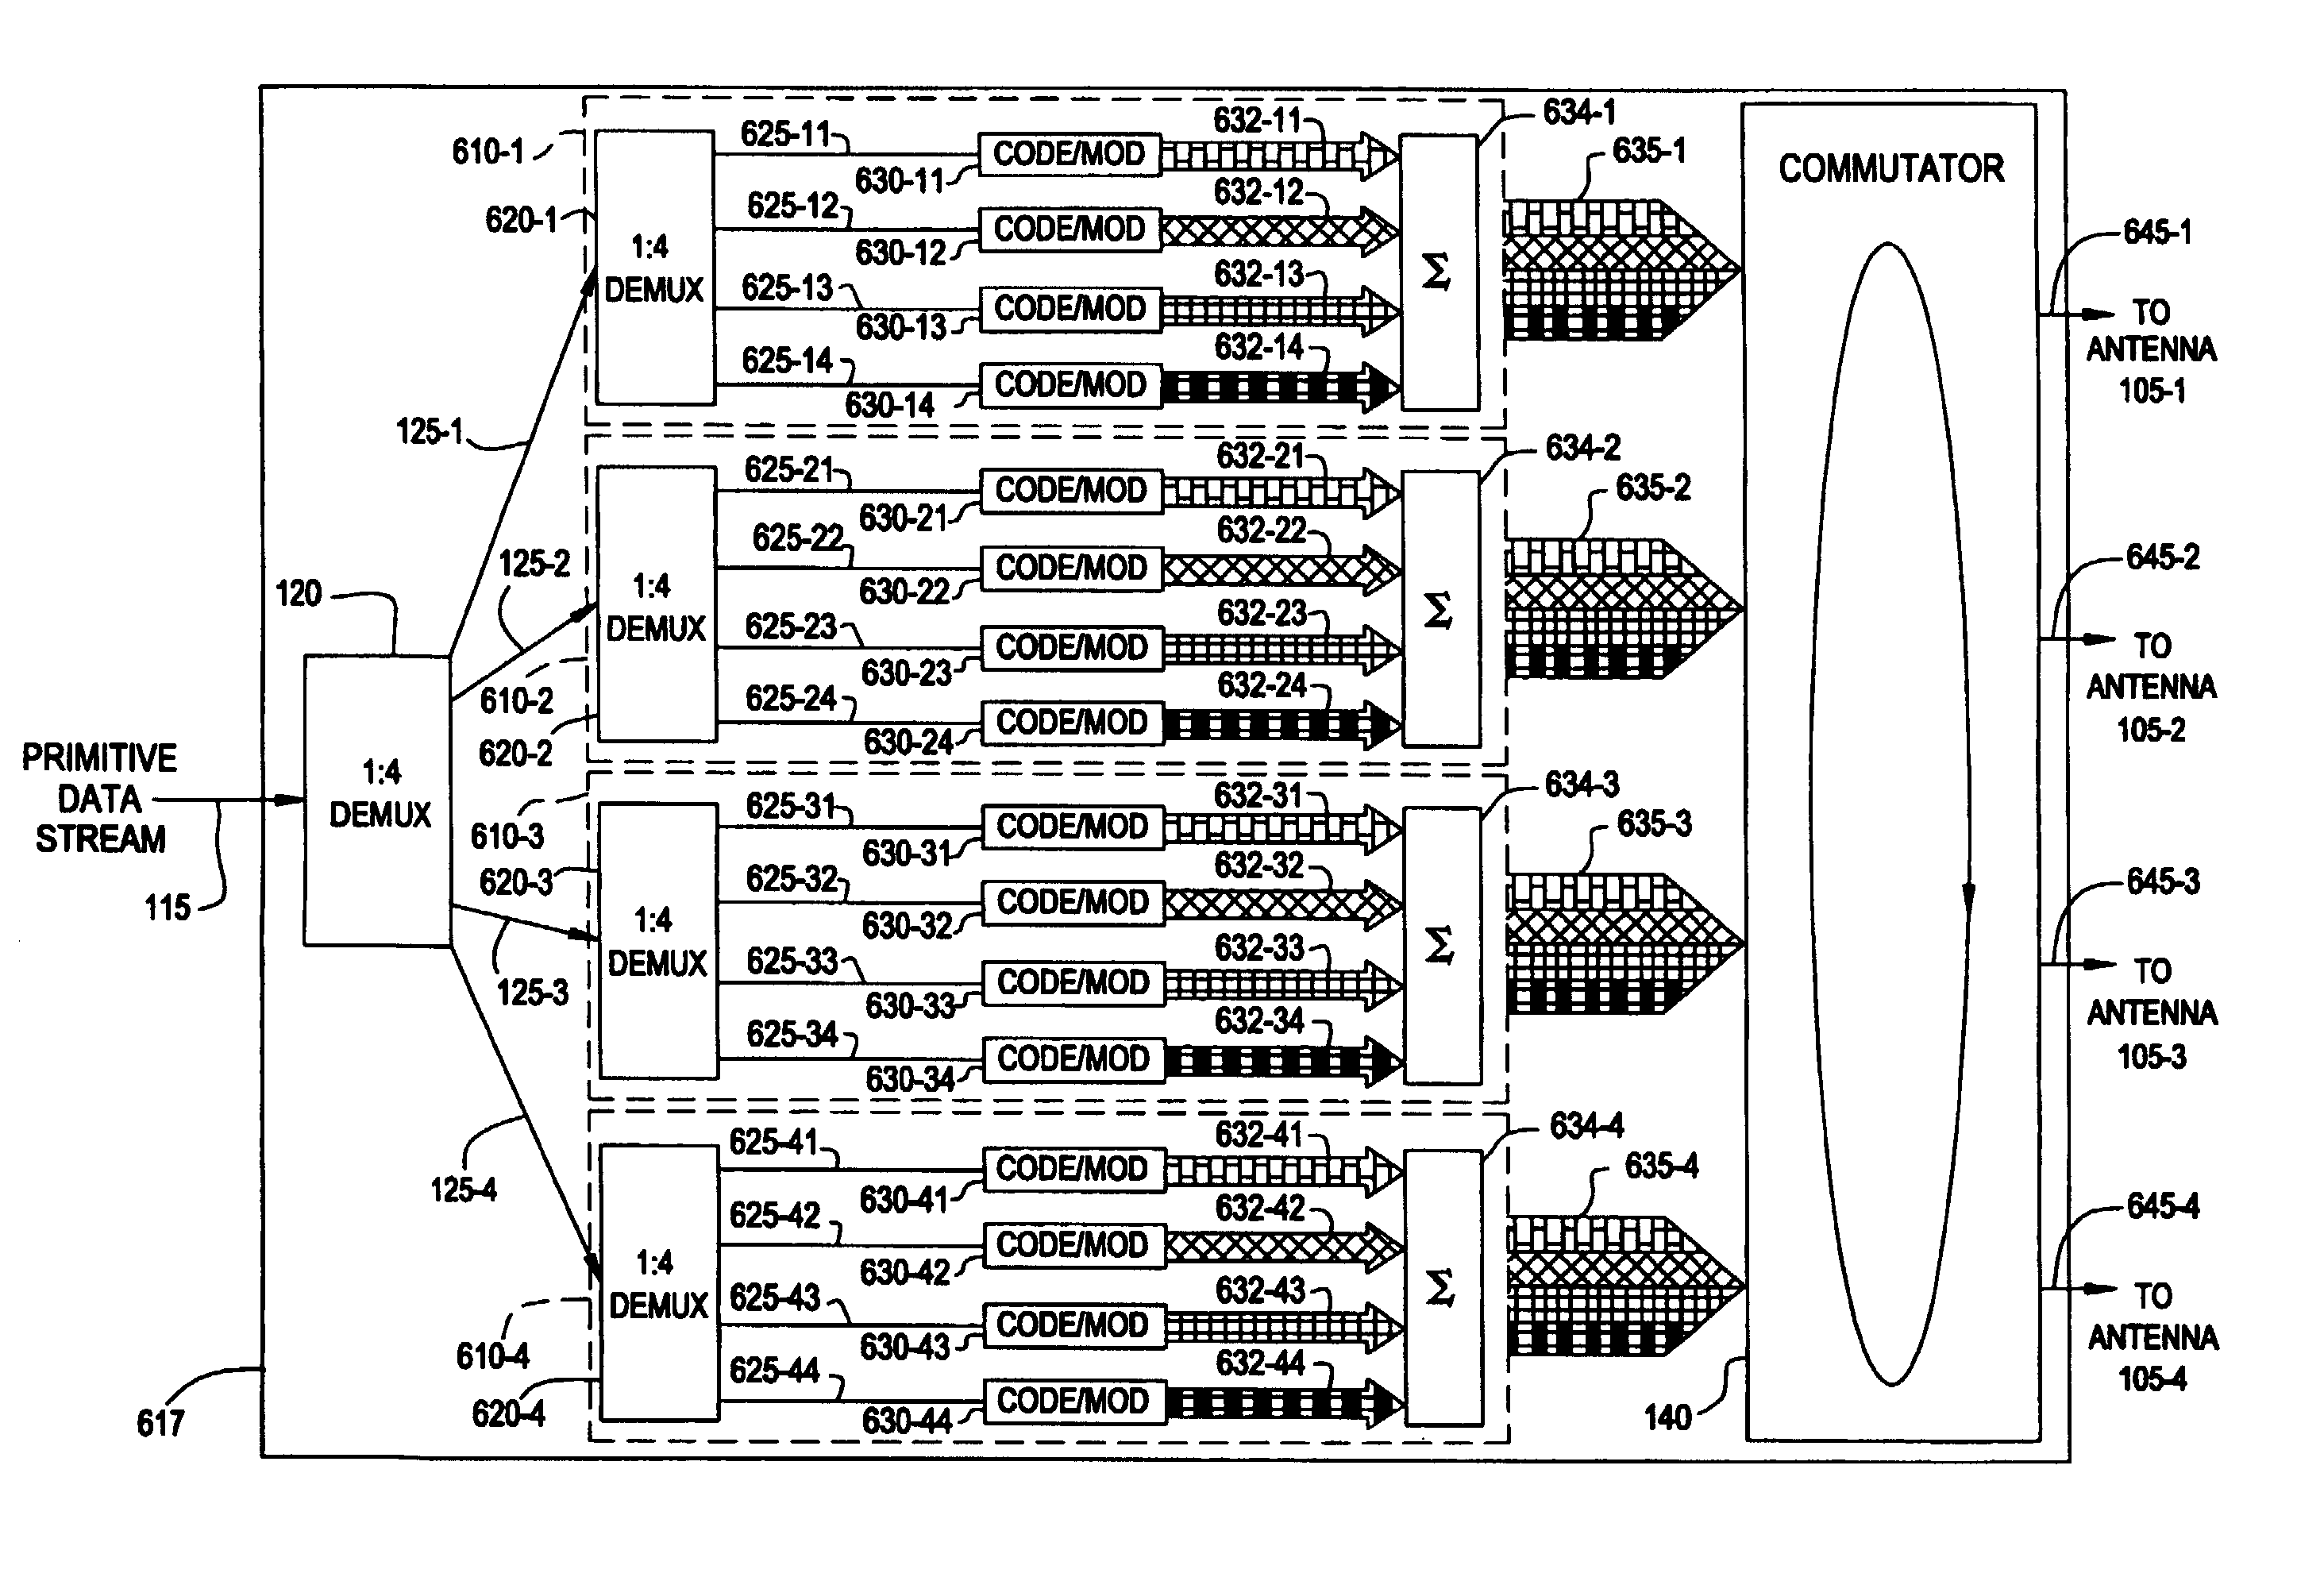 Wireless communication system using multi-element antenna having a space-time architecture